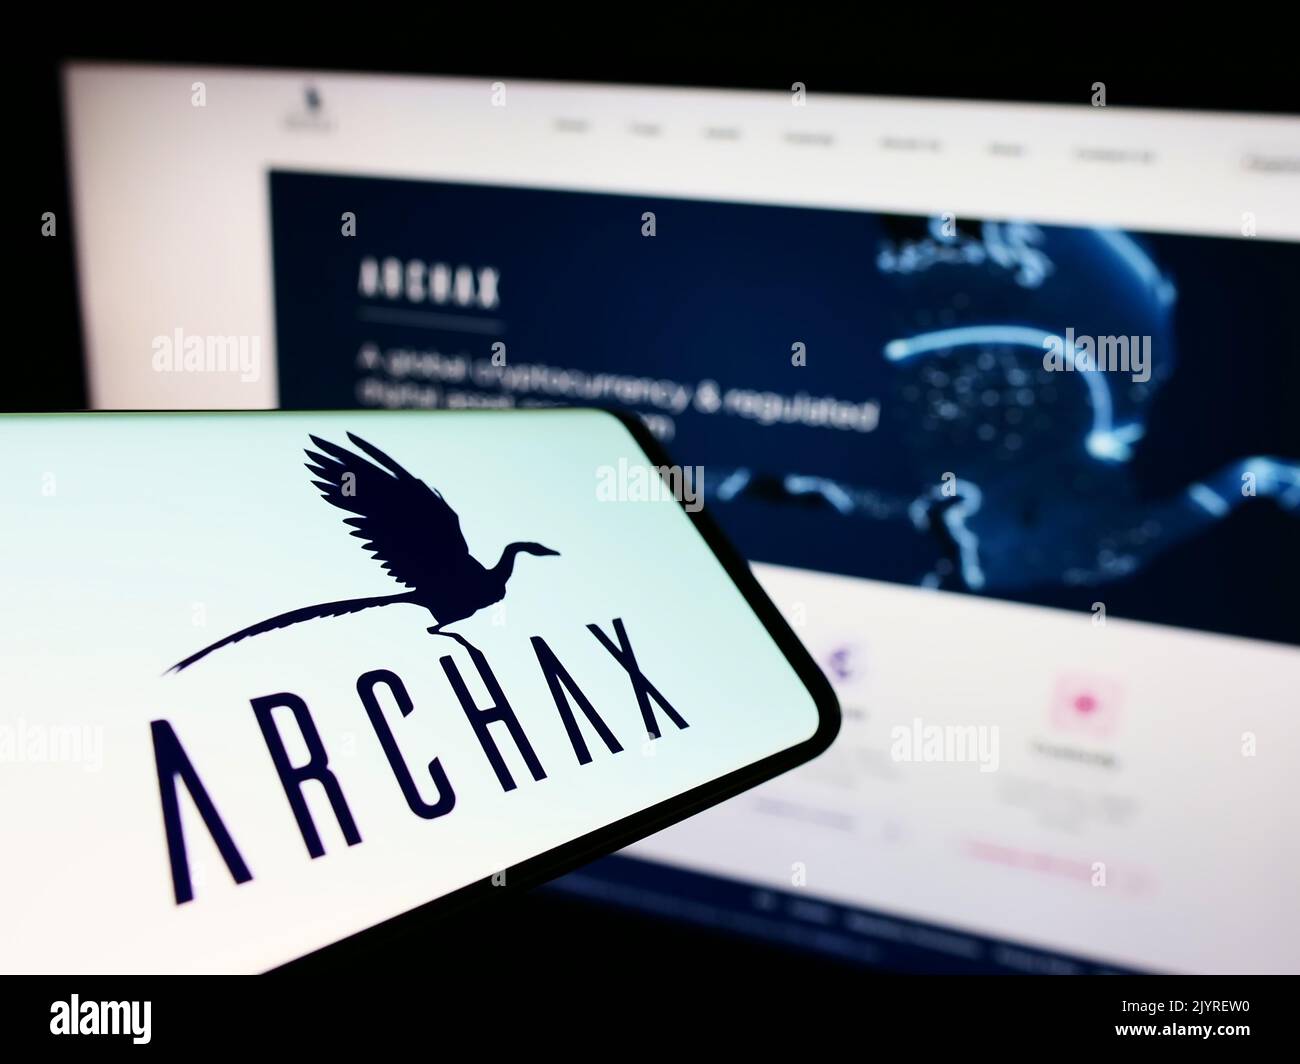 Mobile phone with logo of British crypto company Archax Ltd. on screen in front of business website. Focus on center-right of phone display. Stock Photo